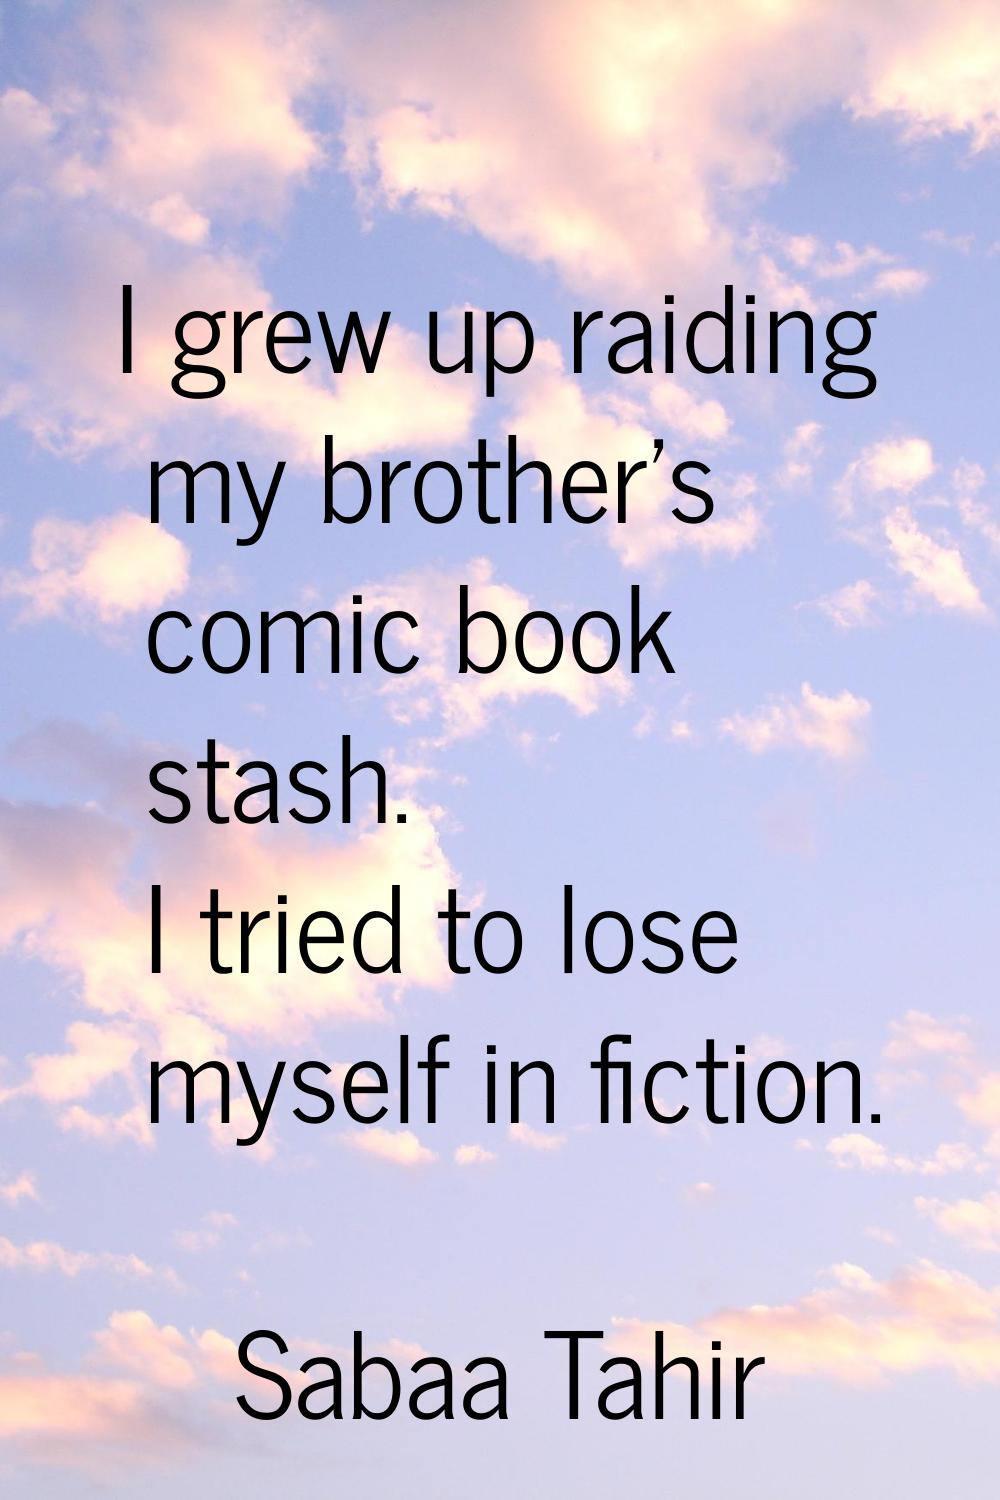 I grew up raiding my brother's comic book stash. I tried to lose myself in fiction.